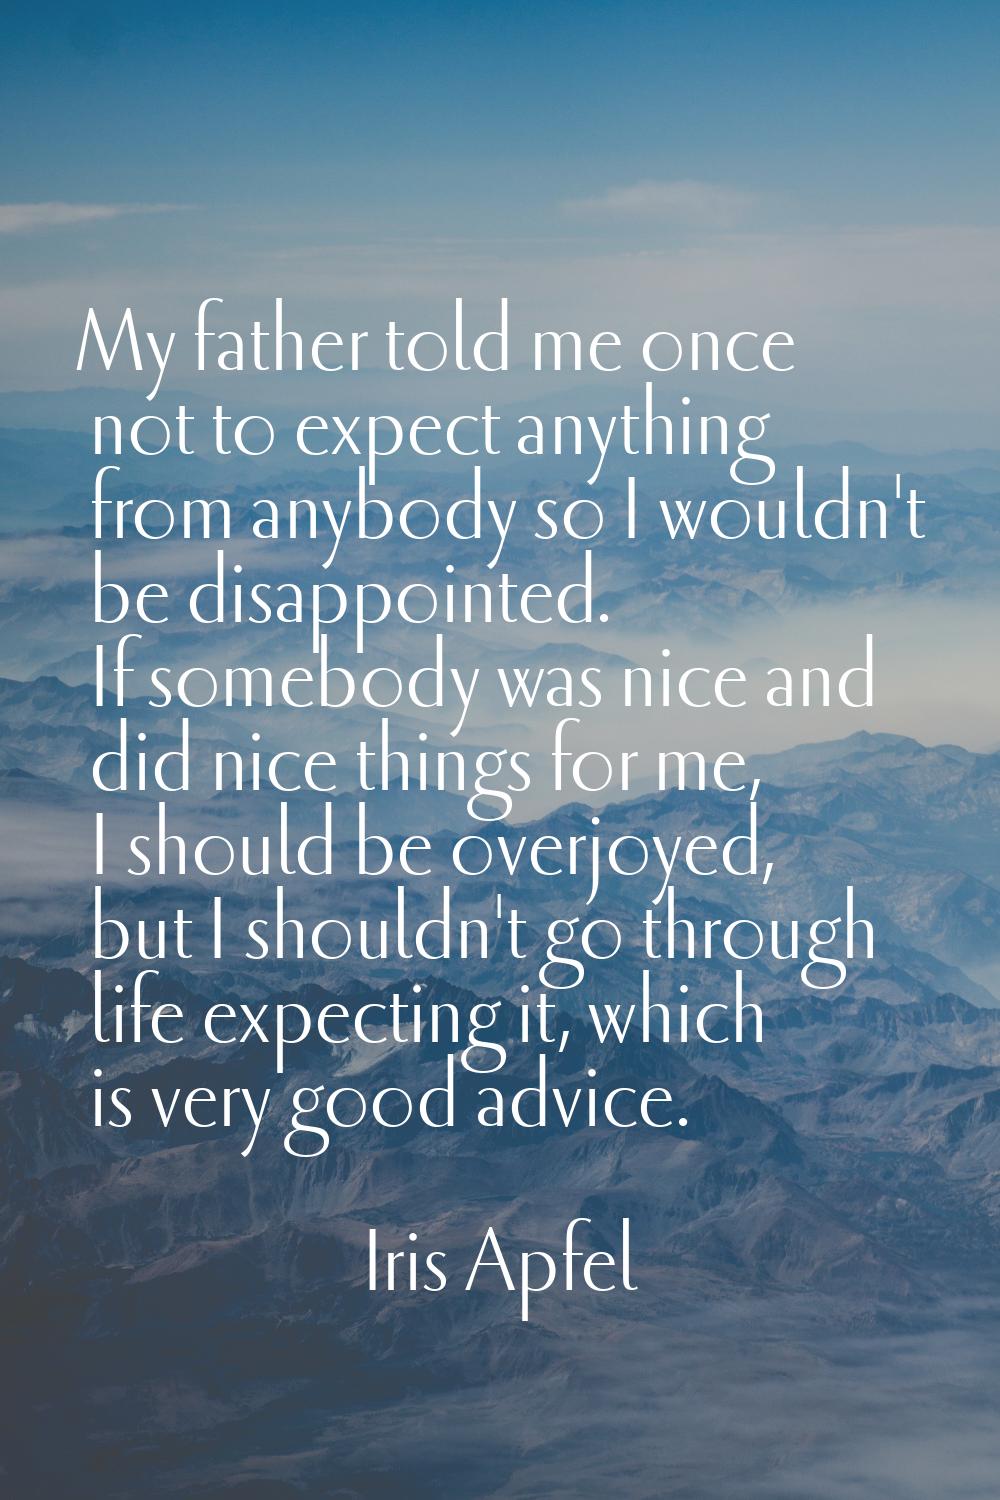 My father told me once not to expect anything from anybody so I wouldn't be disappointed. If somebo